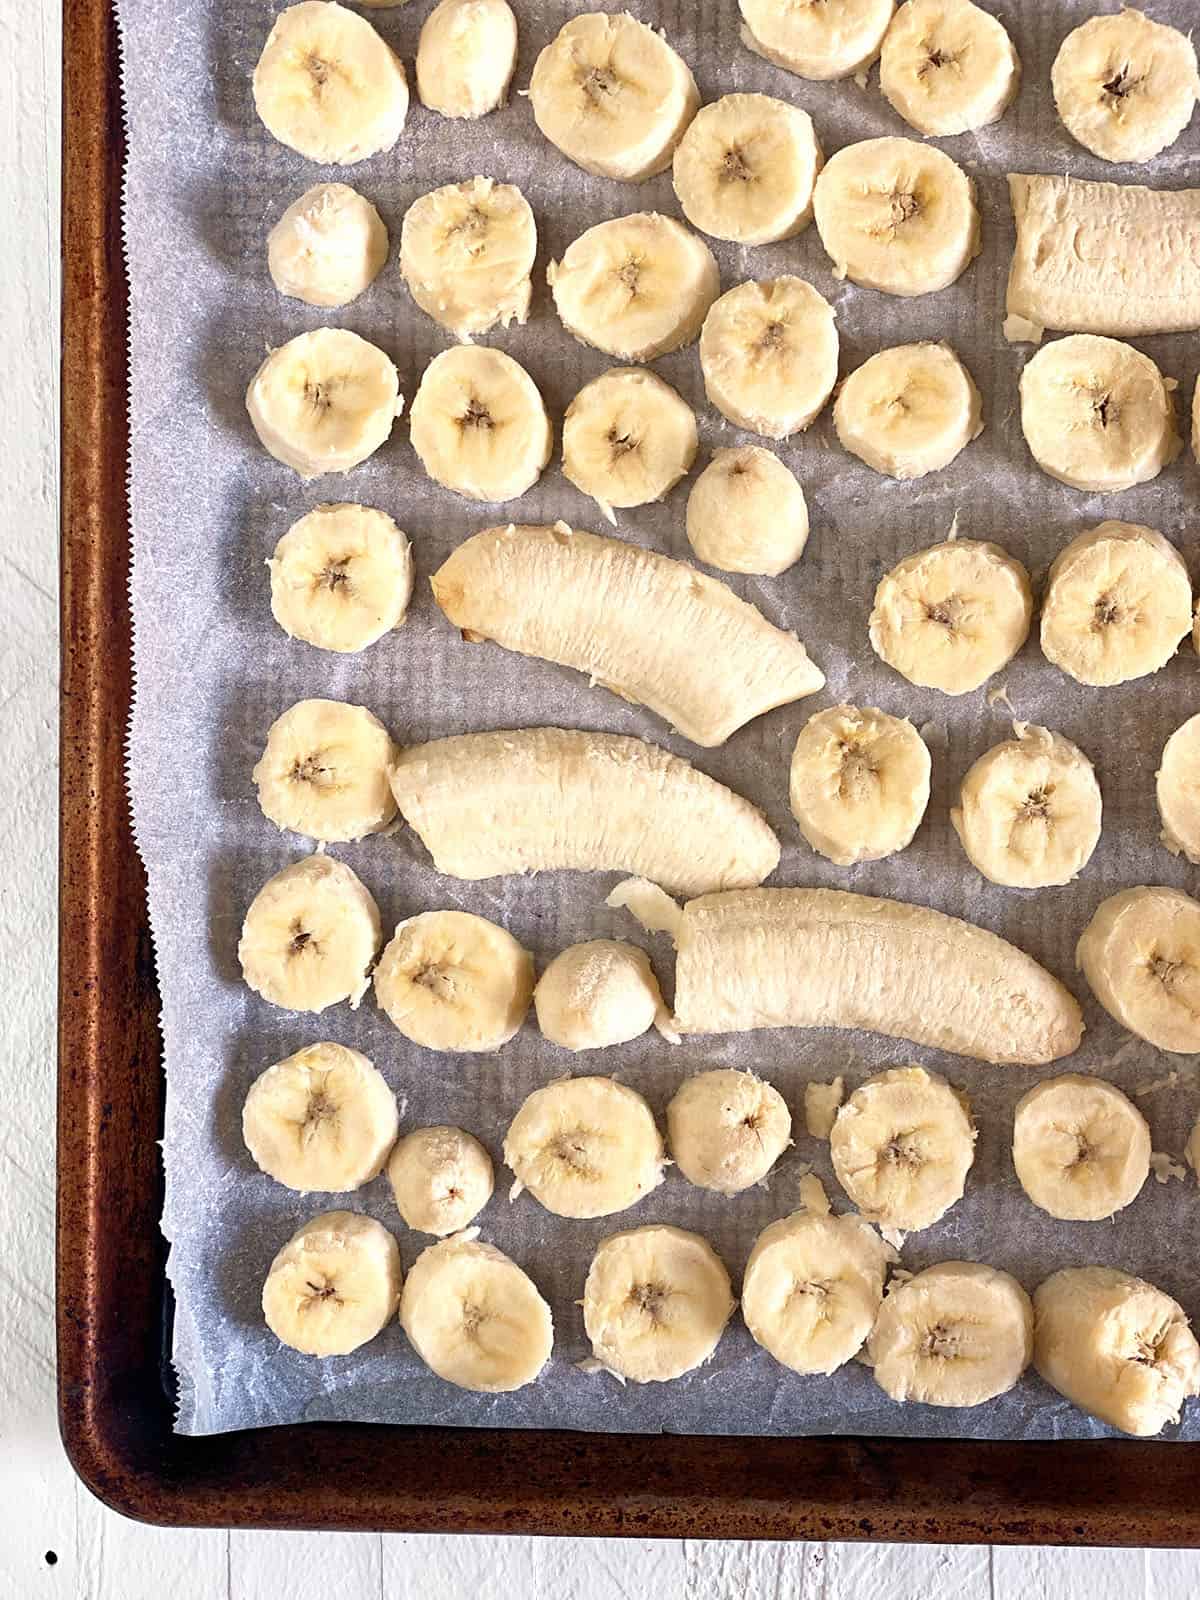 Sliced bananas are spread over a sheet of parchment paper on a baking sheet.